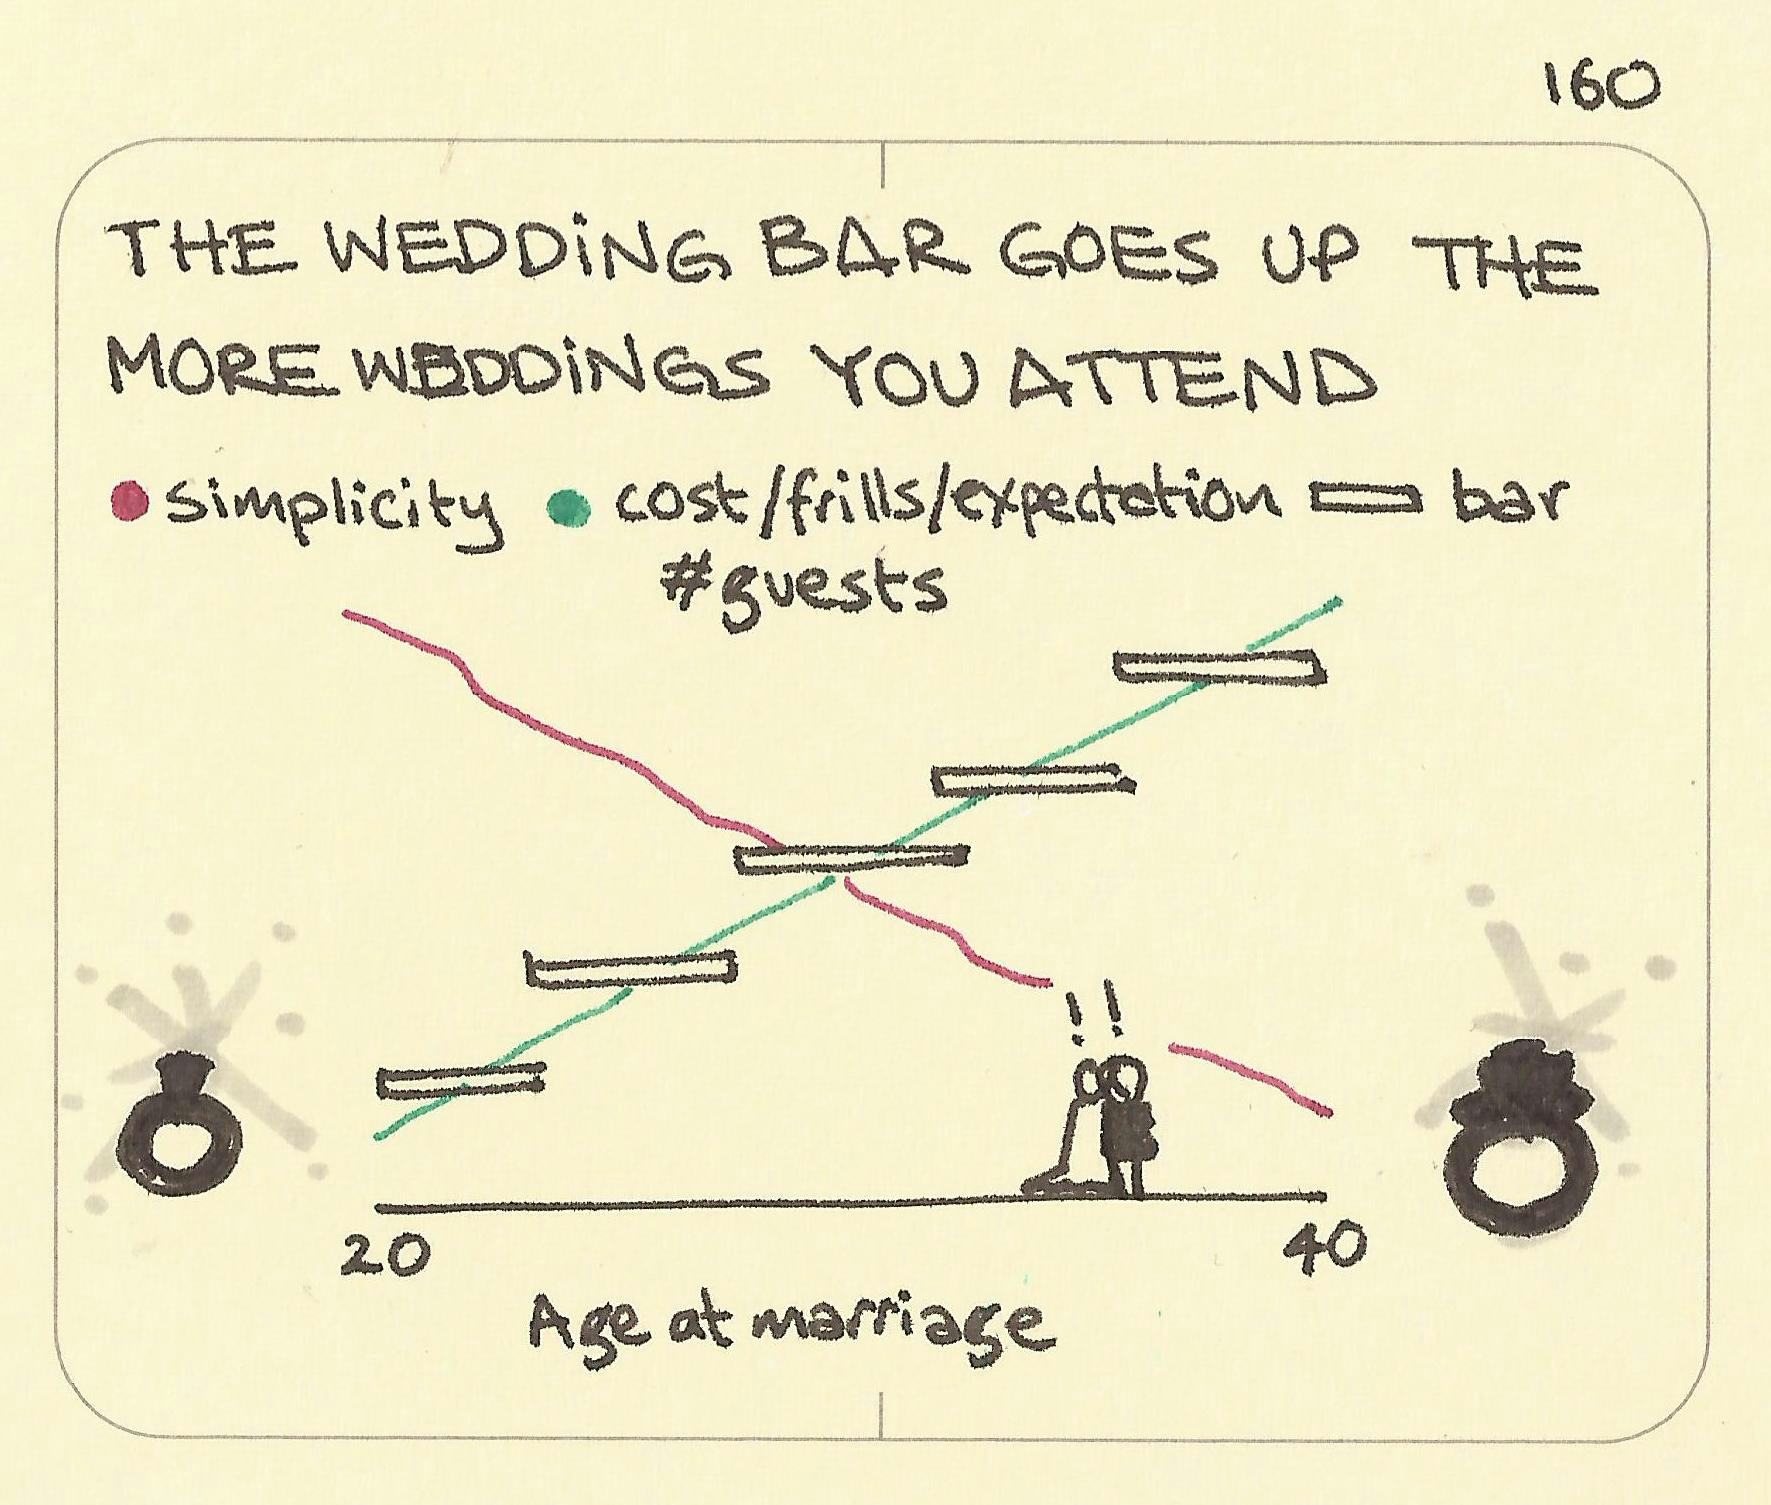 The wedding bar goes up the more weddings you attend - Sketchplanations